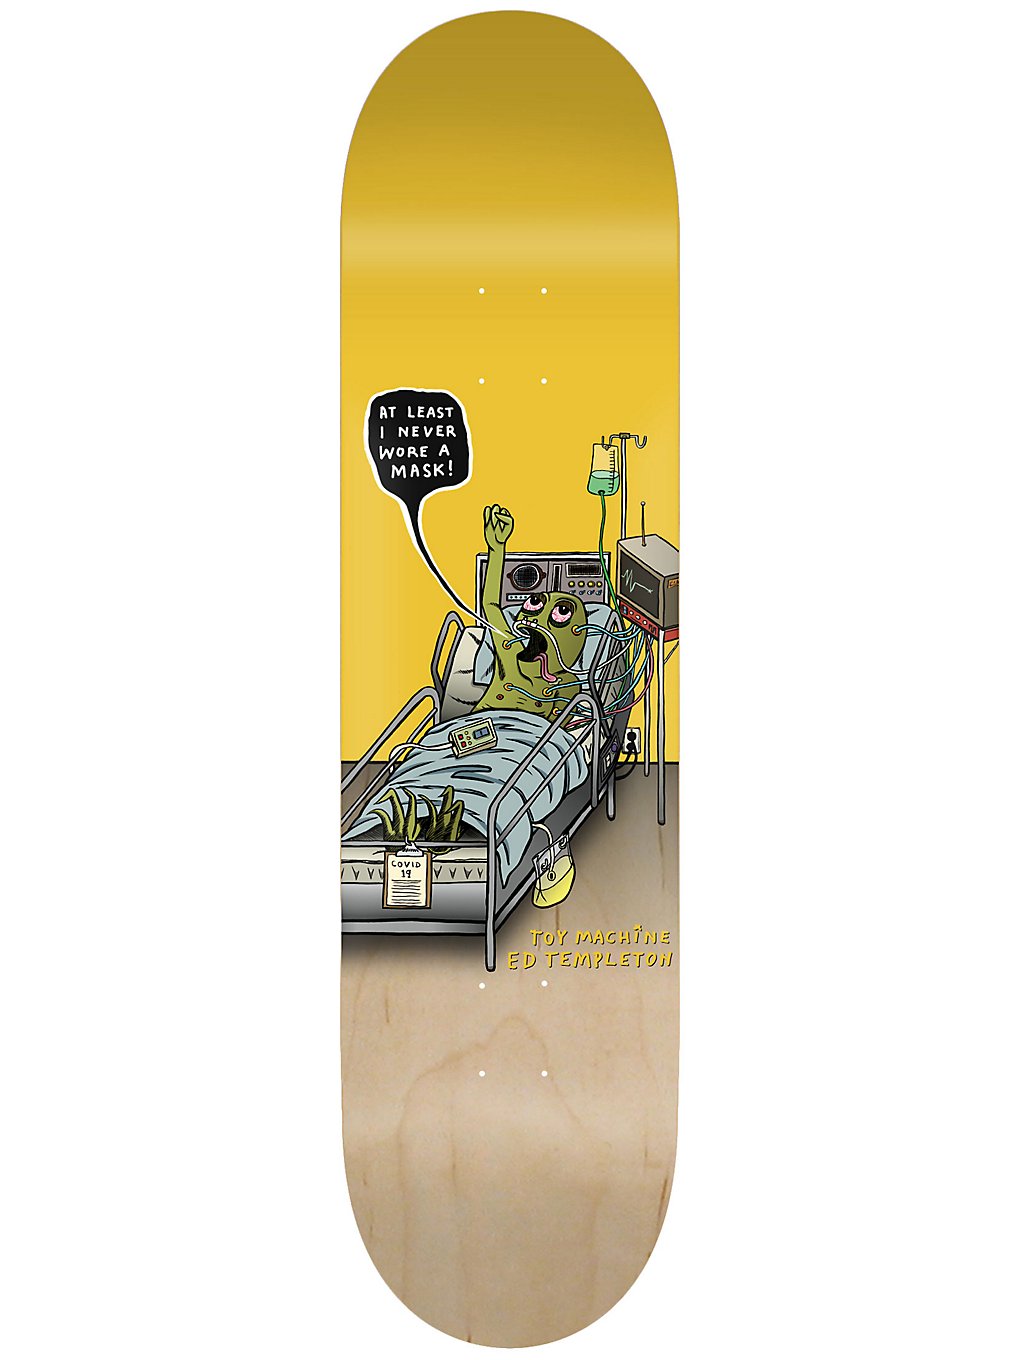 Toy Machine Templeton Never Wore A Mask 8.5 Skateboard Deck natural/yellow